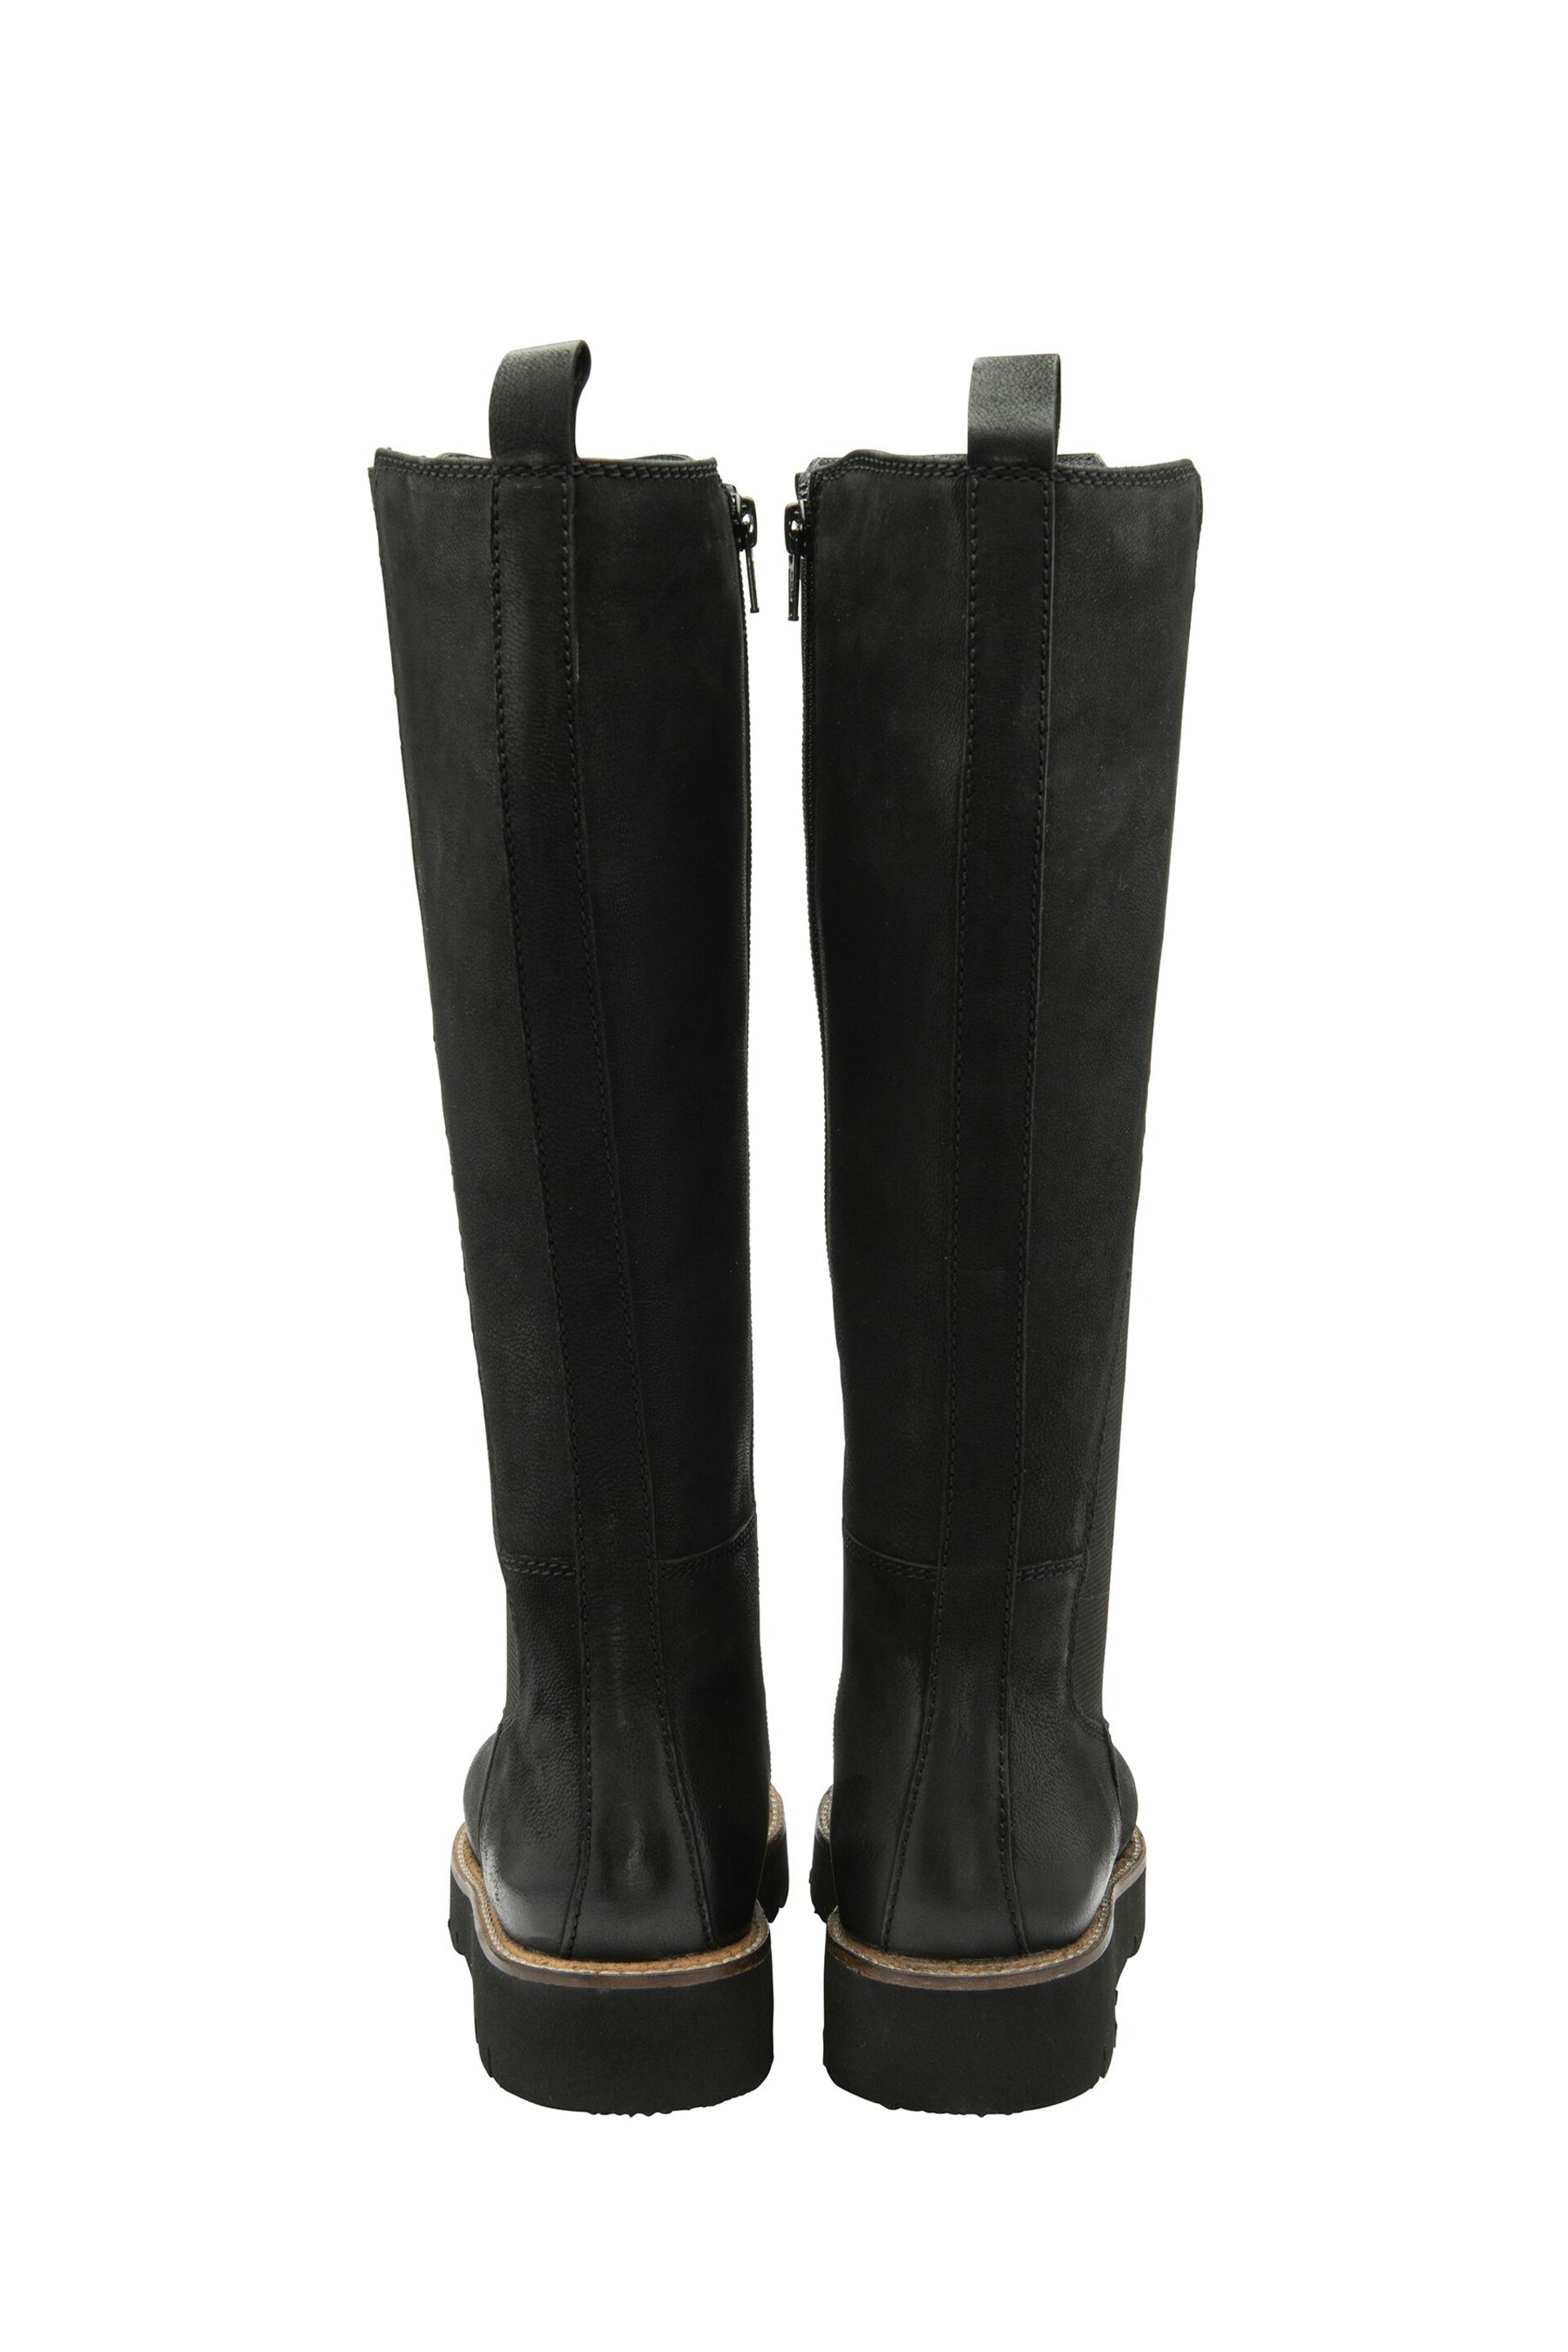 Ravel Black chrome Leather Knee High Chelsea Boots - Image 3 of 4